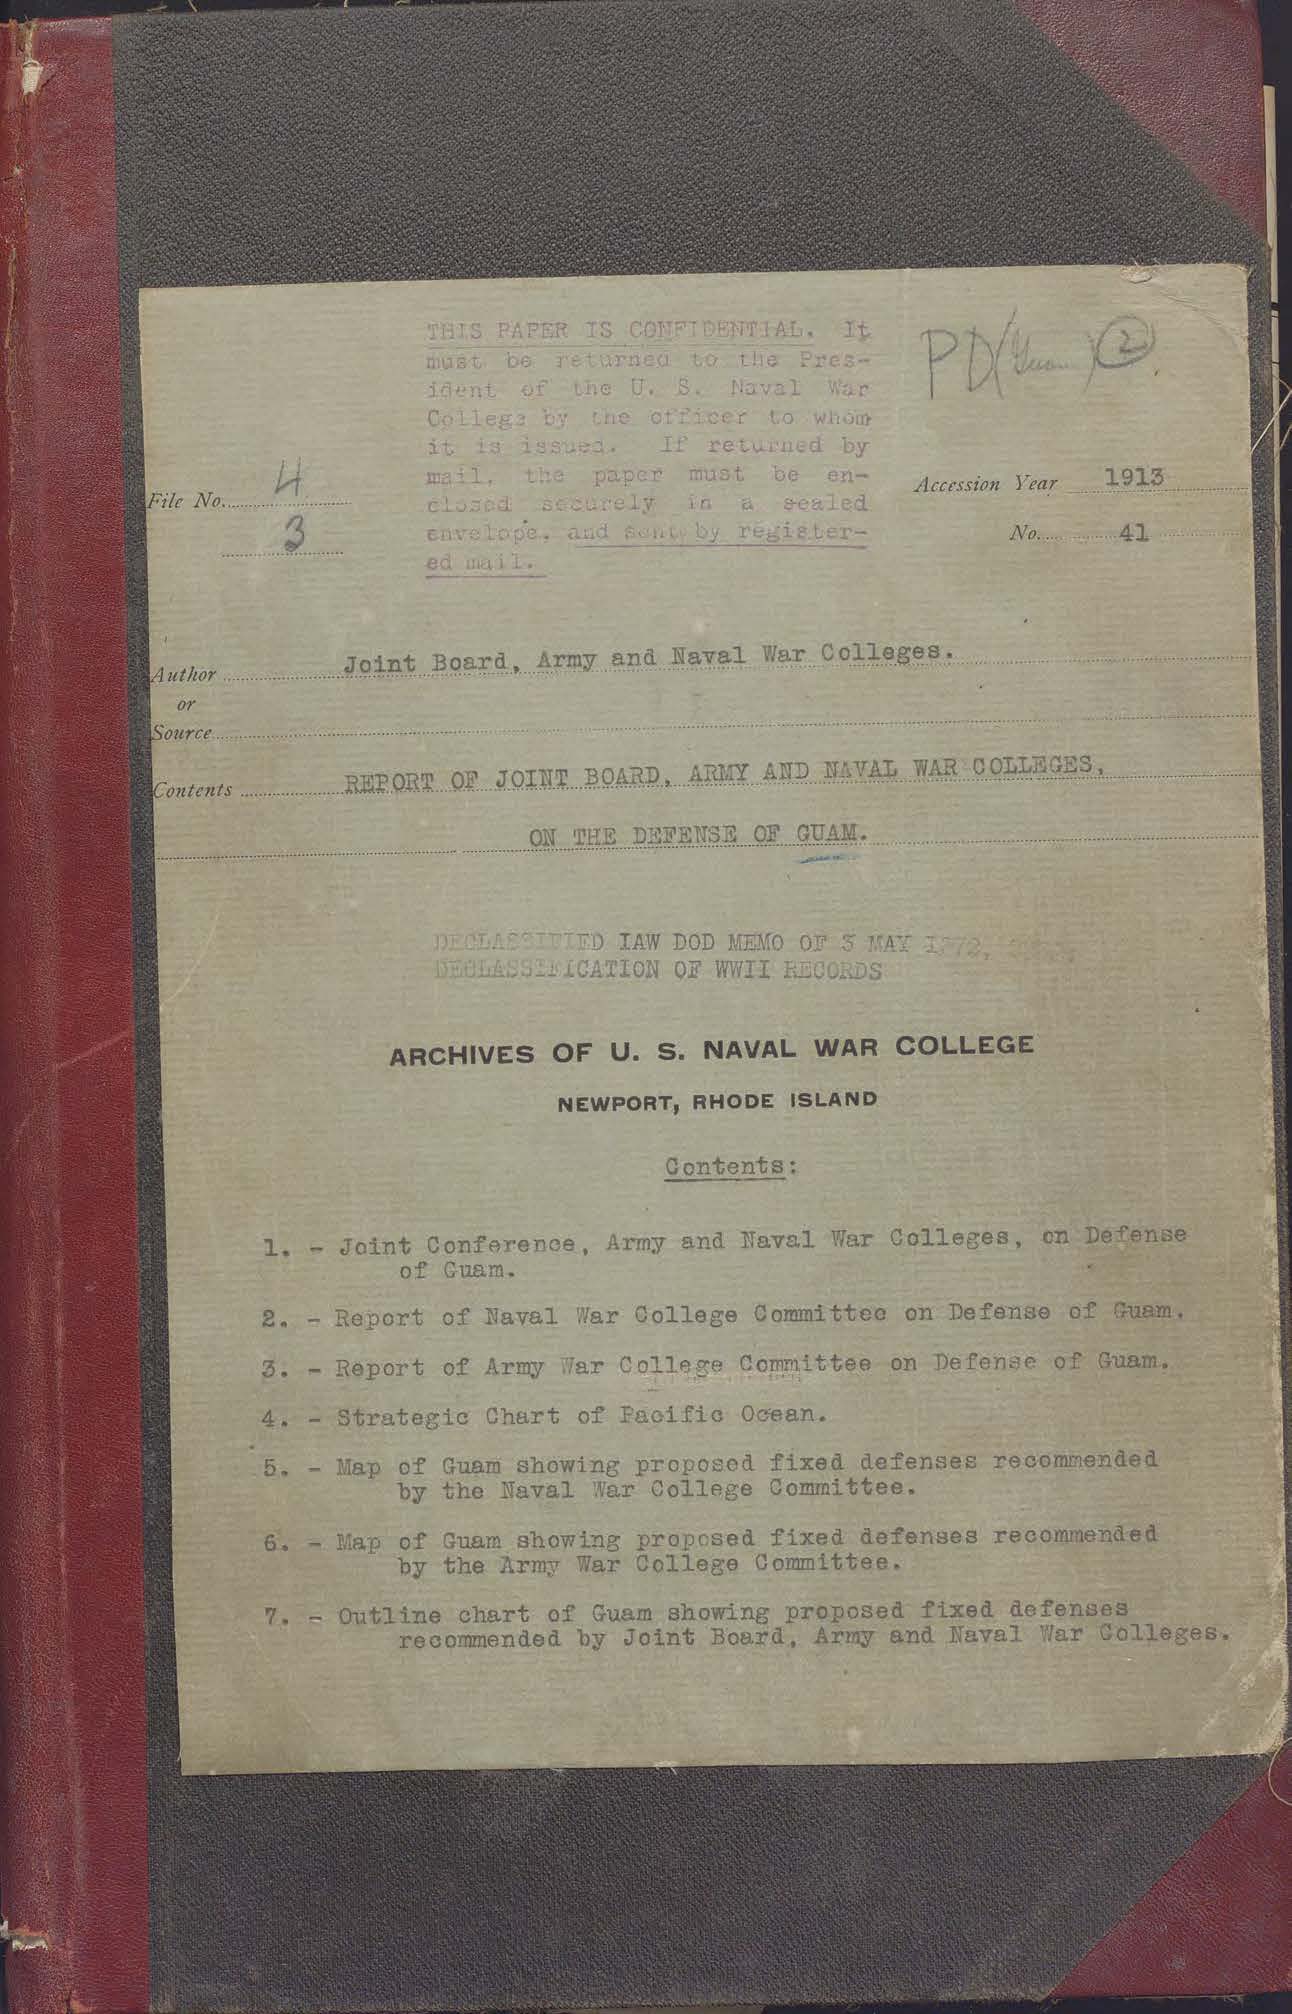 Report of Joint Board, Army and Naval War Colleges, on the Defense of Guam